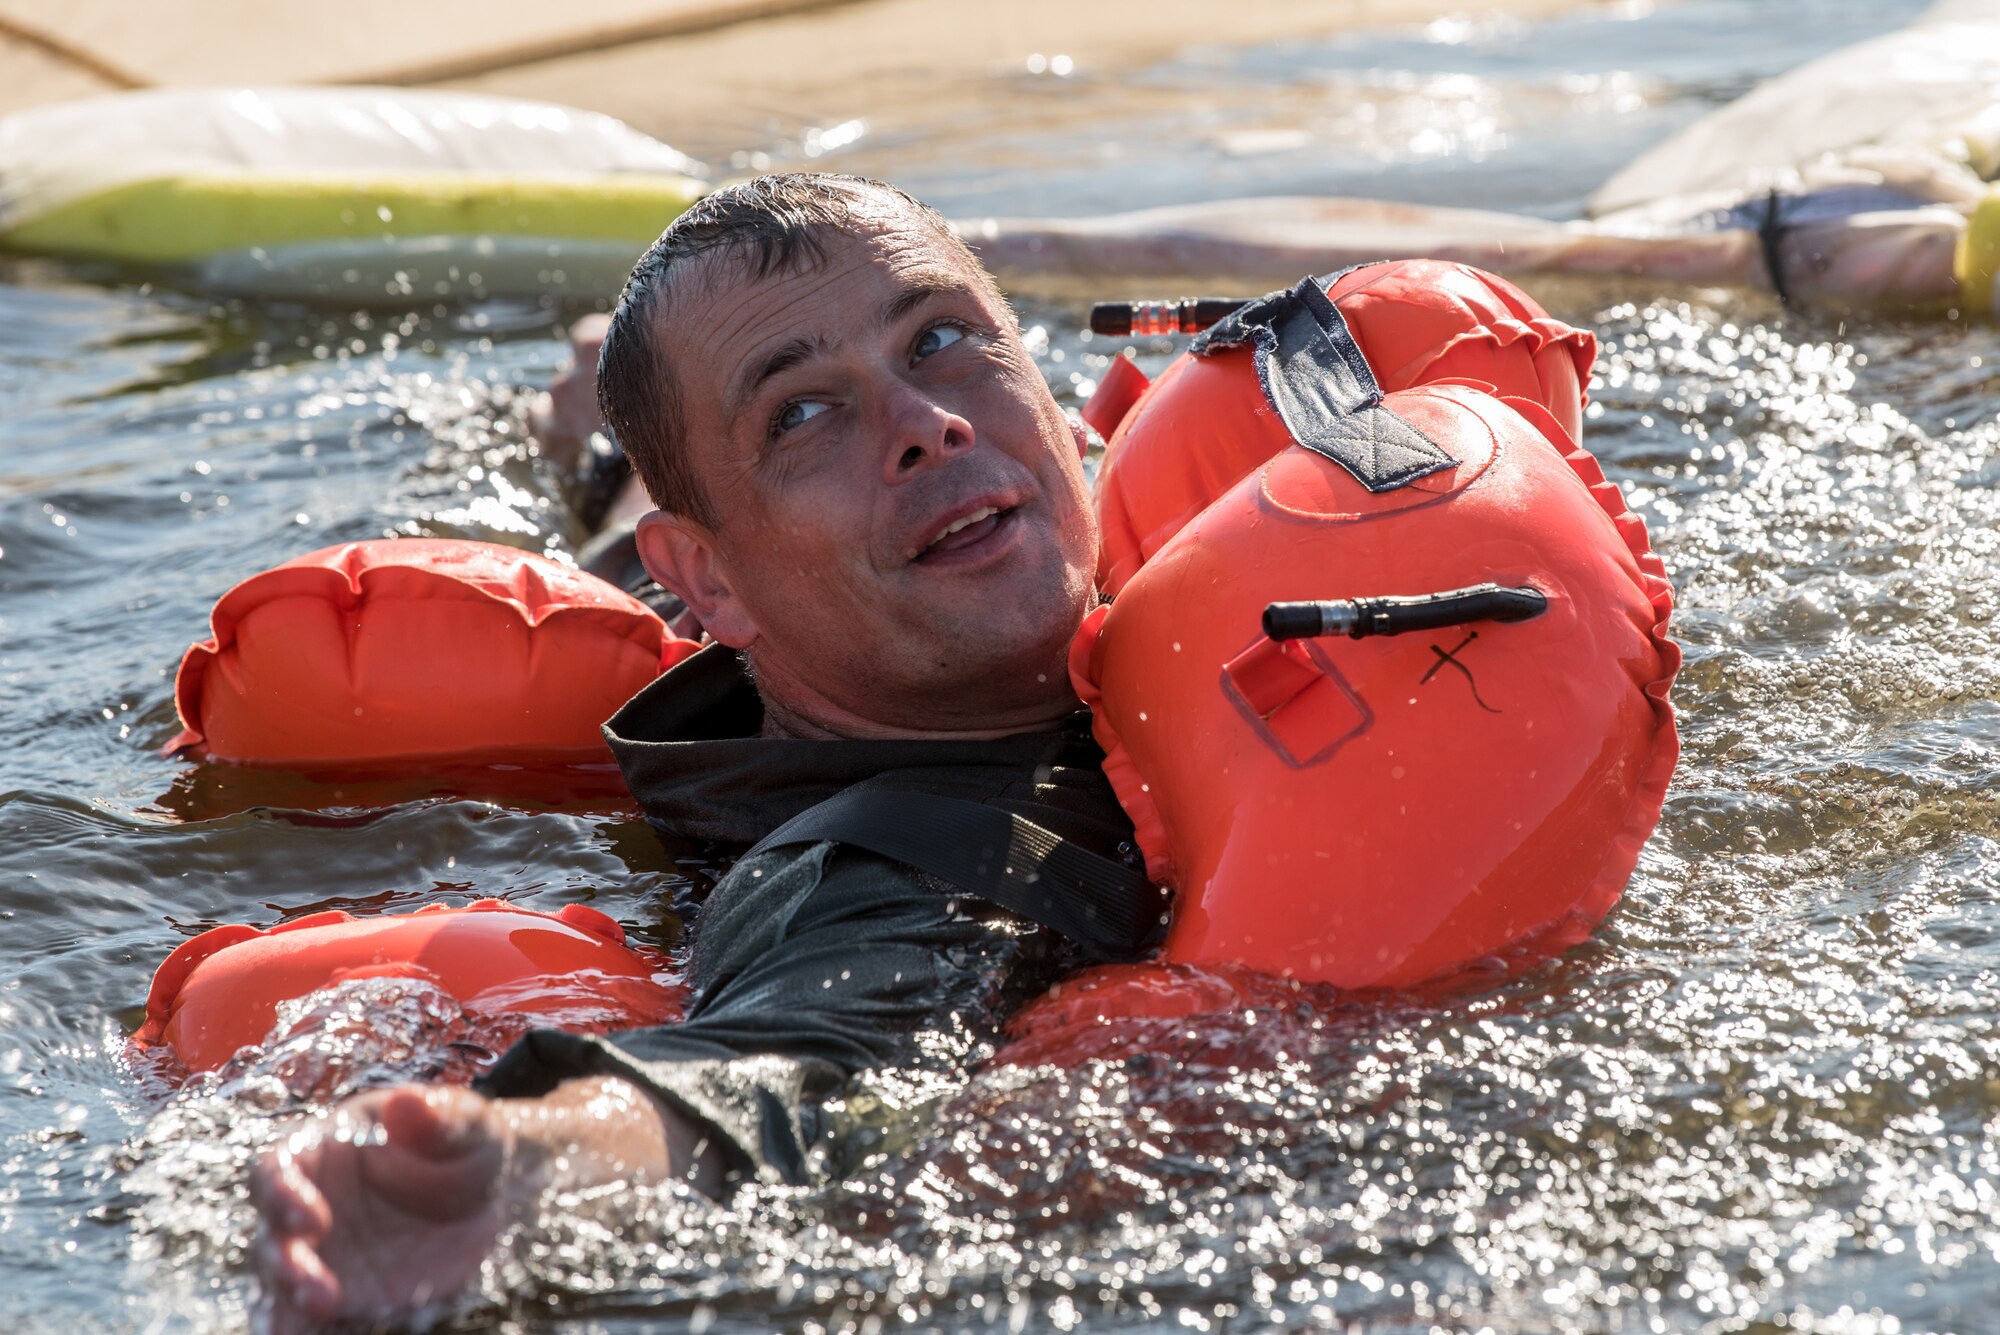 Tech. Sgt. Brian Milburn, a loadmaster for the Kentucky Air National Guard’s 123rd Contingency Response Group, extricates himself from a floating parachute during water survival training at Camp Crooked Creek in Shepherdsville, Ky., Sept. 14, 2019. The training also covered land survival techniques and orienteering. (U.S. Air National Guard photo by Staff Sgt. Joshua Horton)